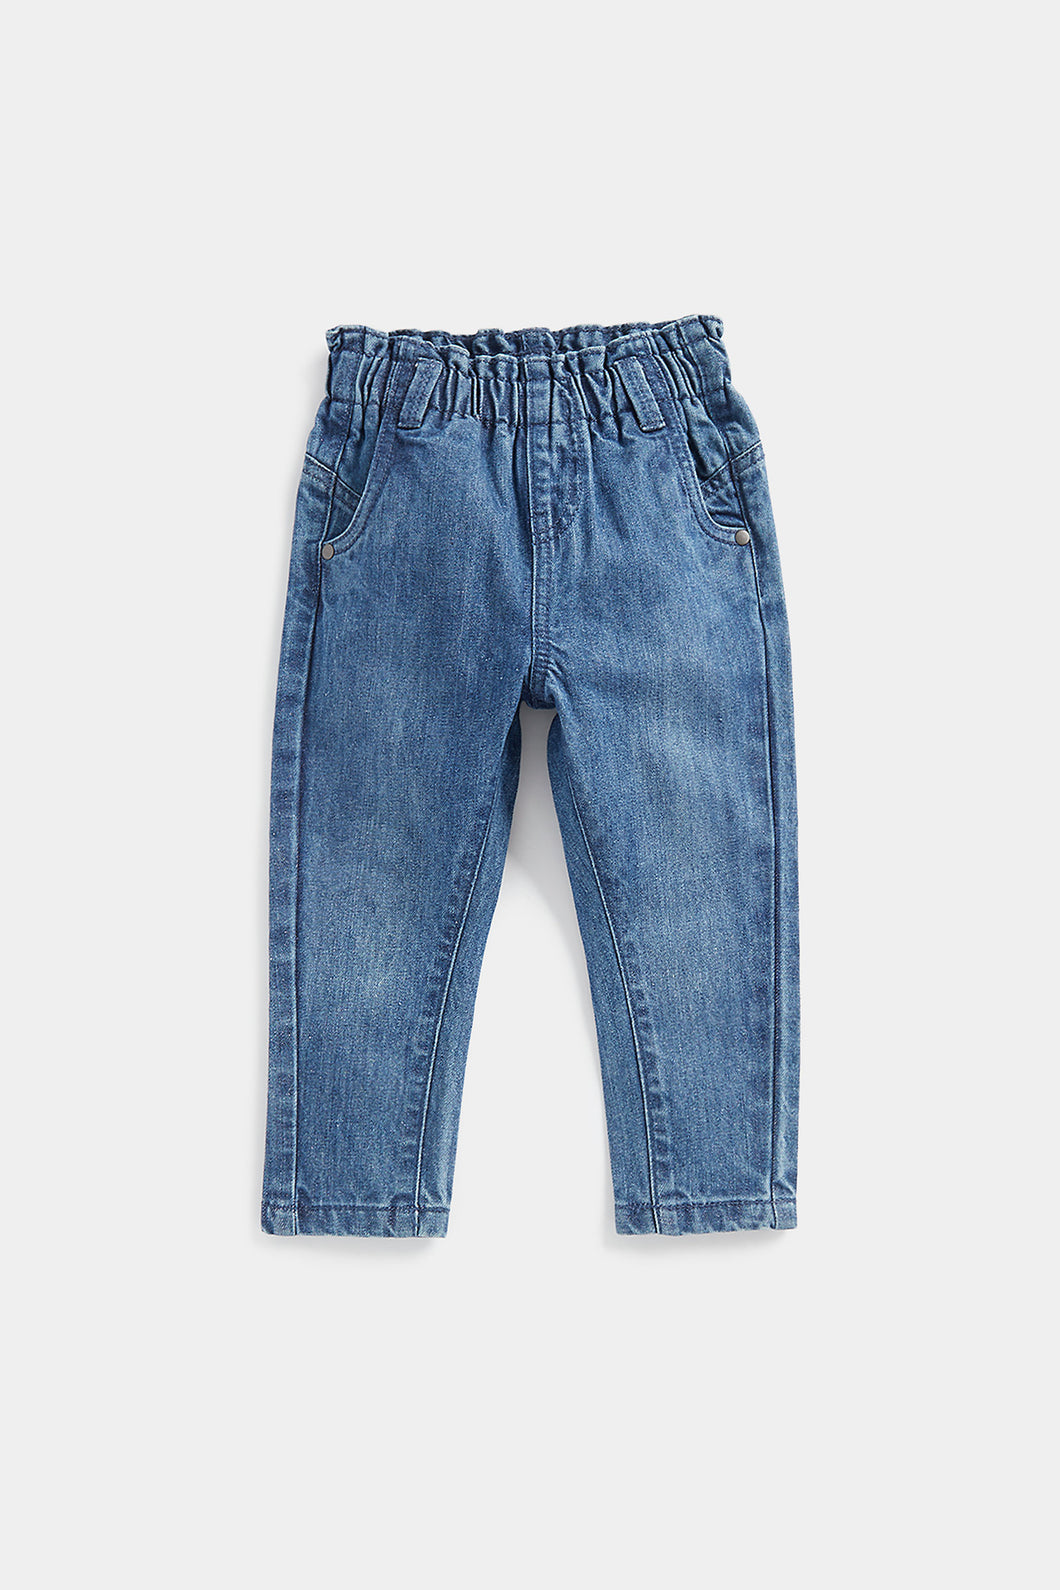 Mothercare Paperbag Jeans